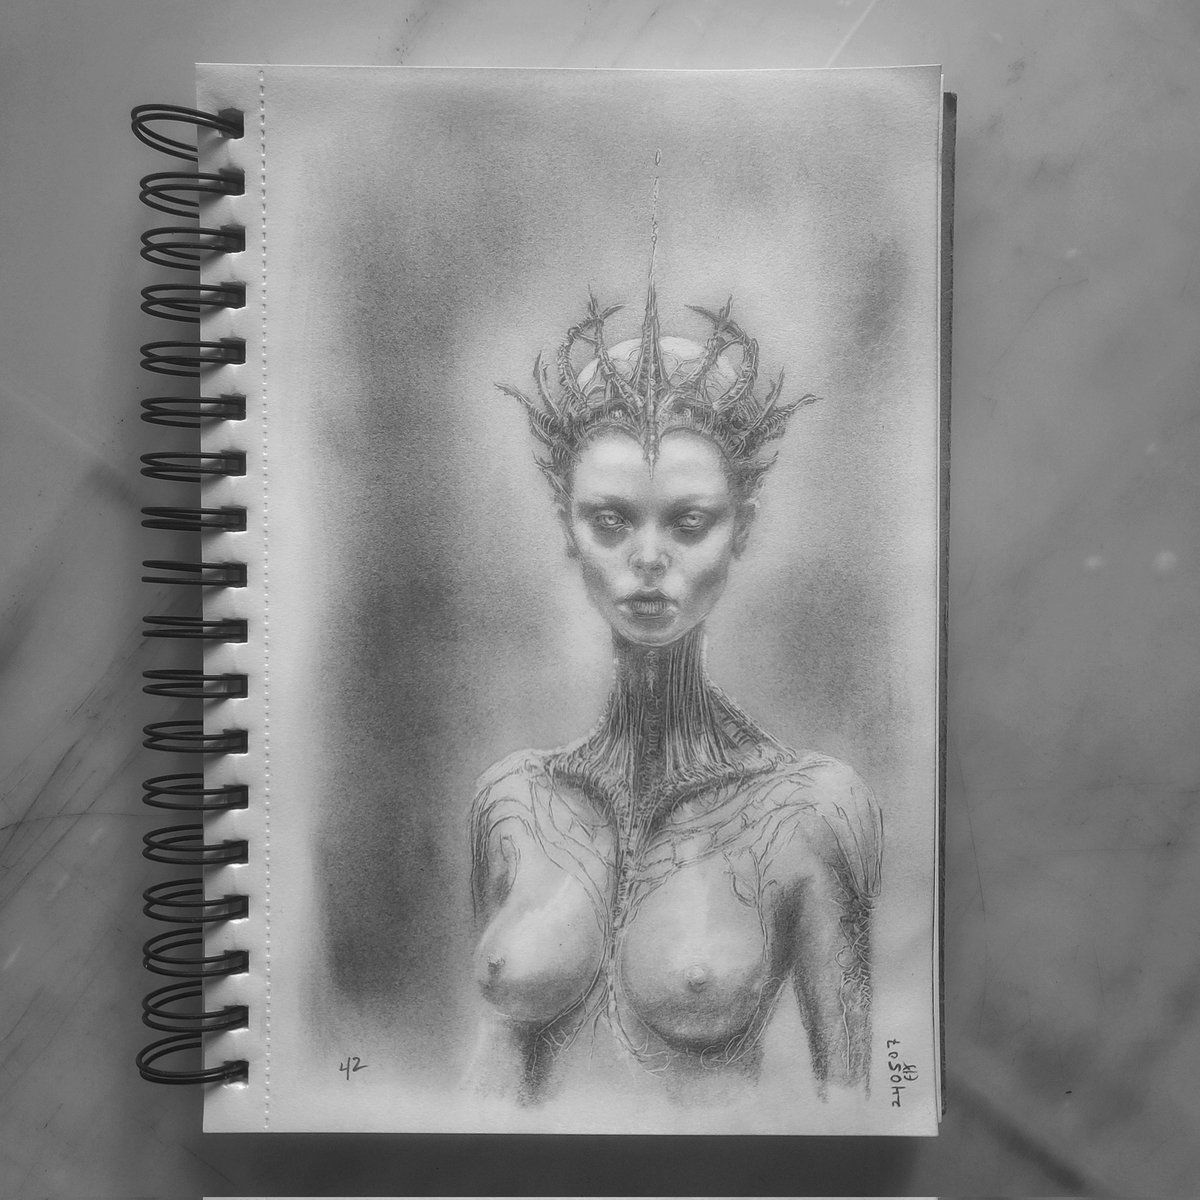 NECRONOMIsketch 42
Not sure if this will be a Twofer Tuesday.
#sketchbook #darkart